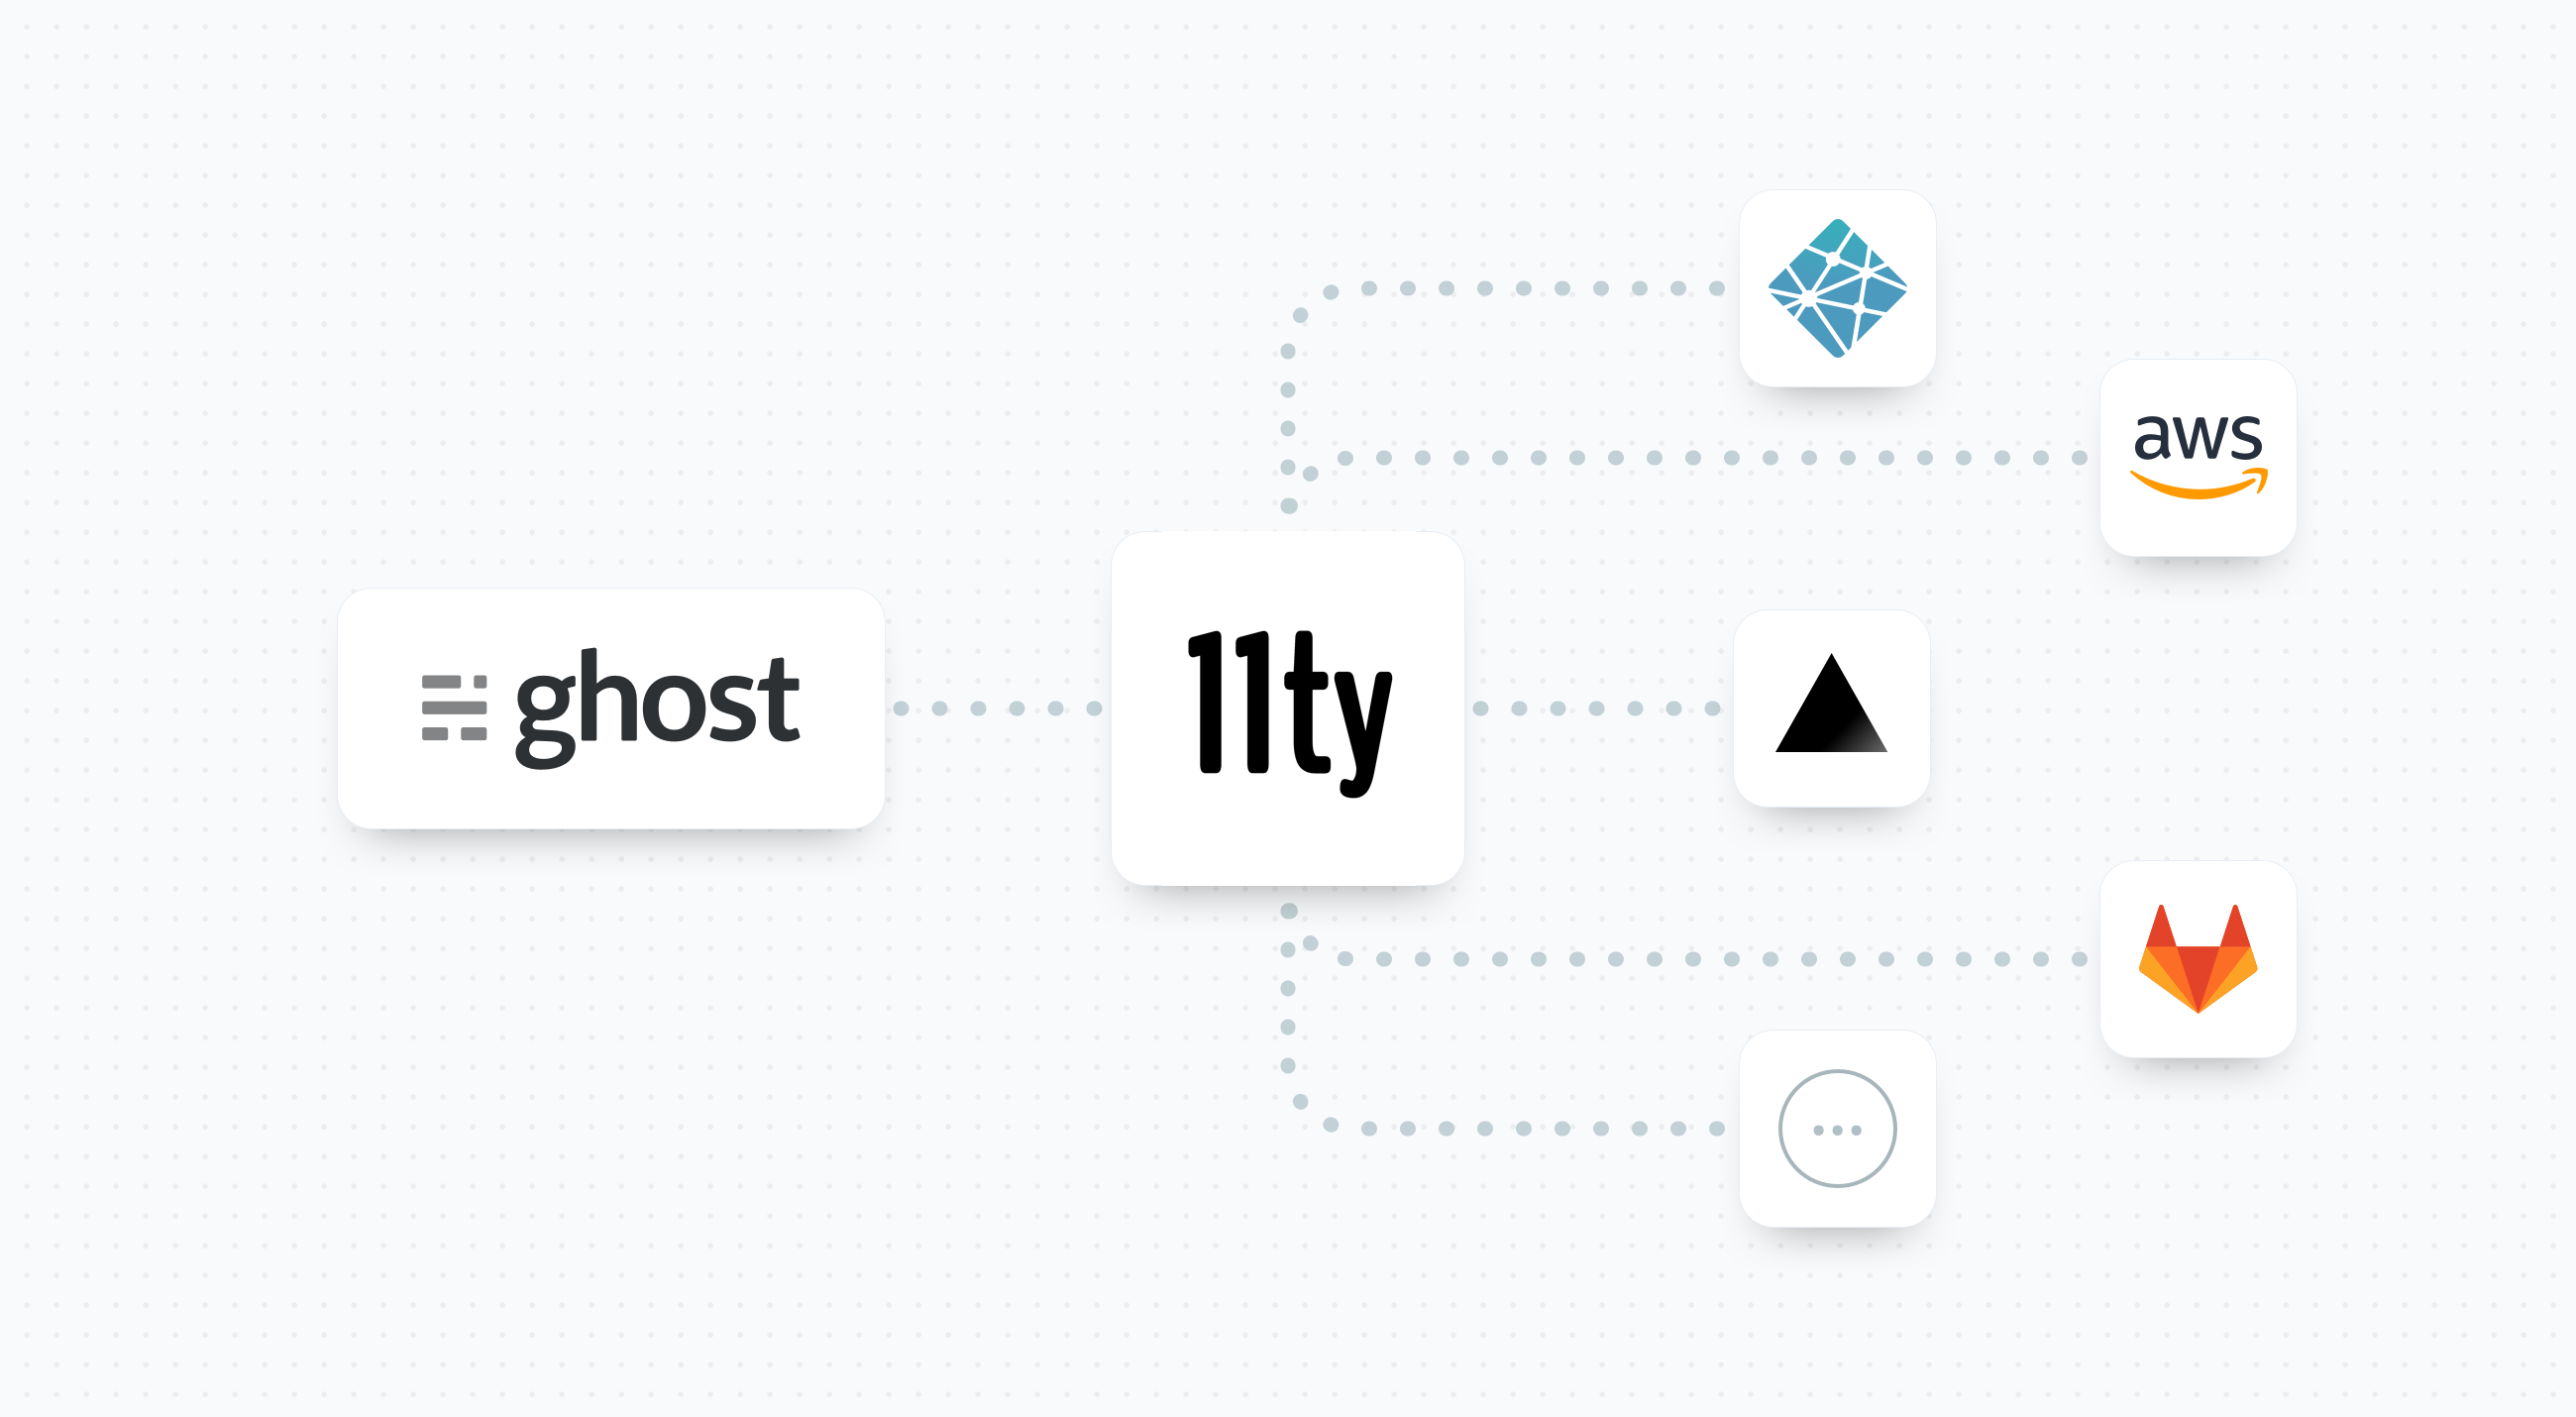 Diagram showing Ghost data being fed into Eleventy and subsequently Eleventy being deployed to various hosting platforms